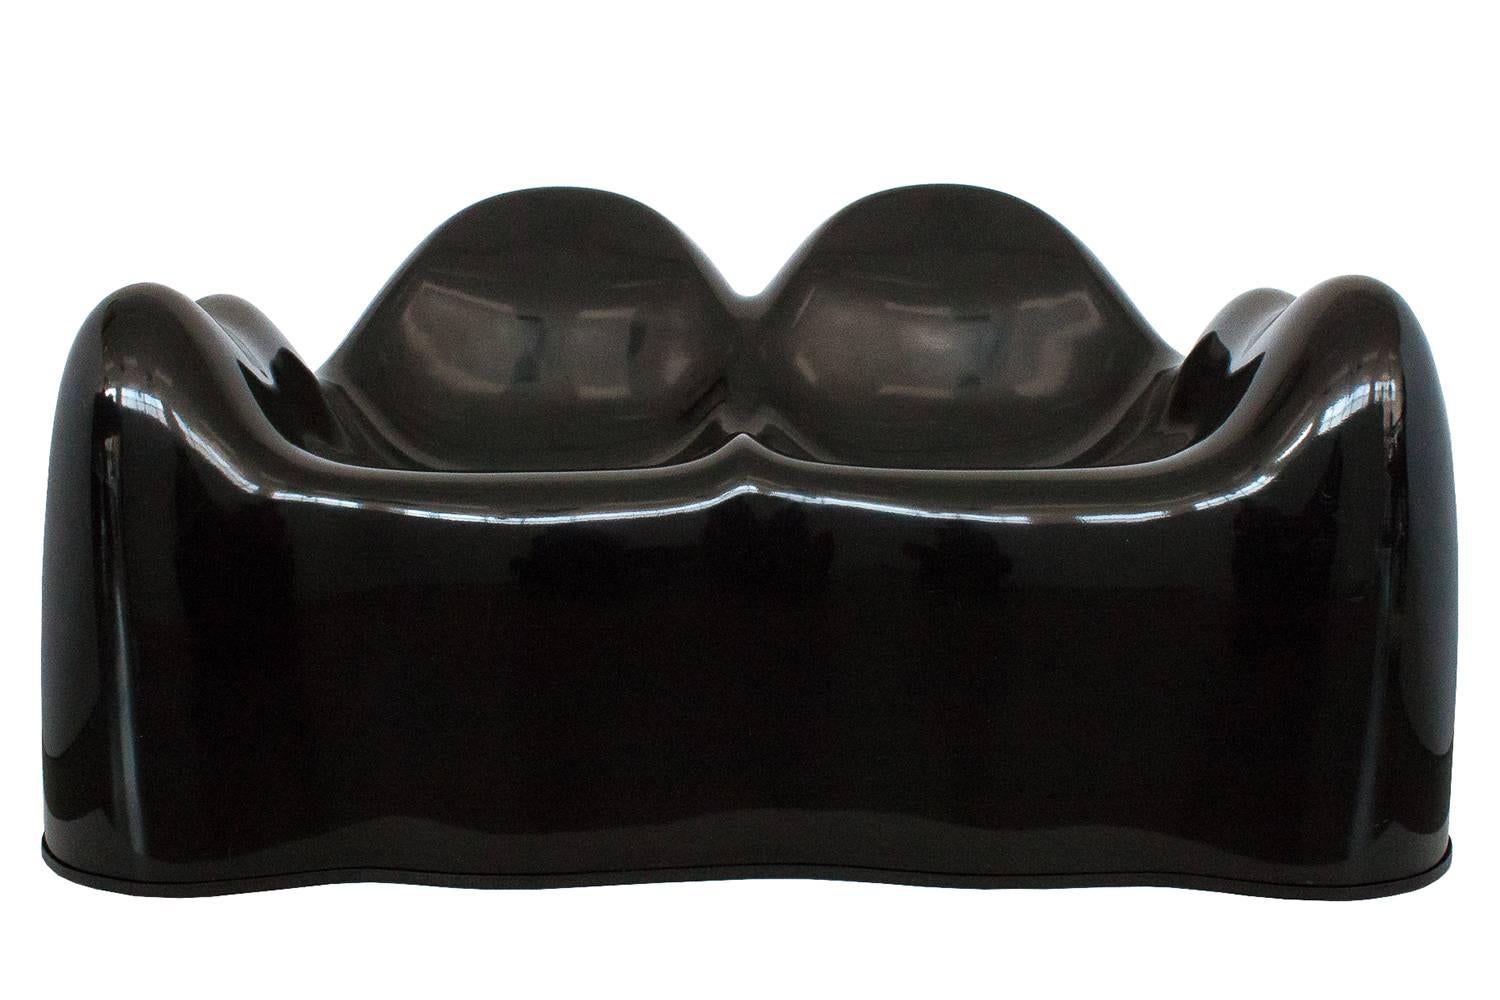 Rare and uncommon black Molar Settee by Wendell Castle, circa 1969 and distributed by Beylerian. The settee or loveseat is comprised of gel-coated fiberglass reinforced plastic. A stunning and sculptural iconic piece of design. This settee was part